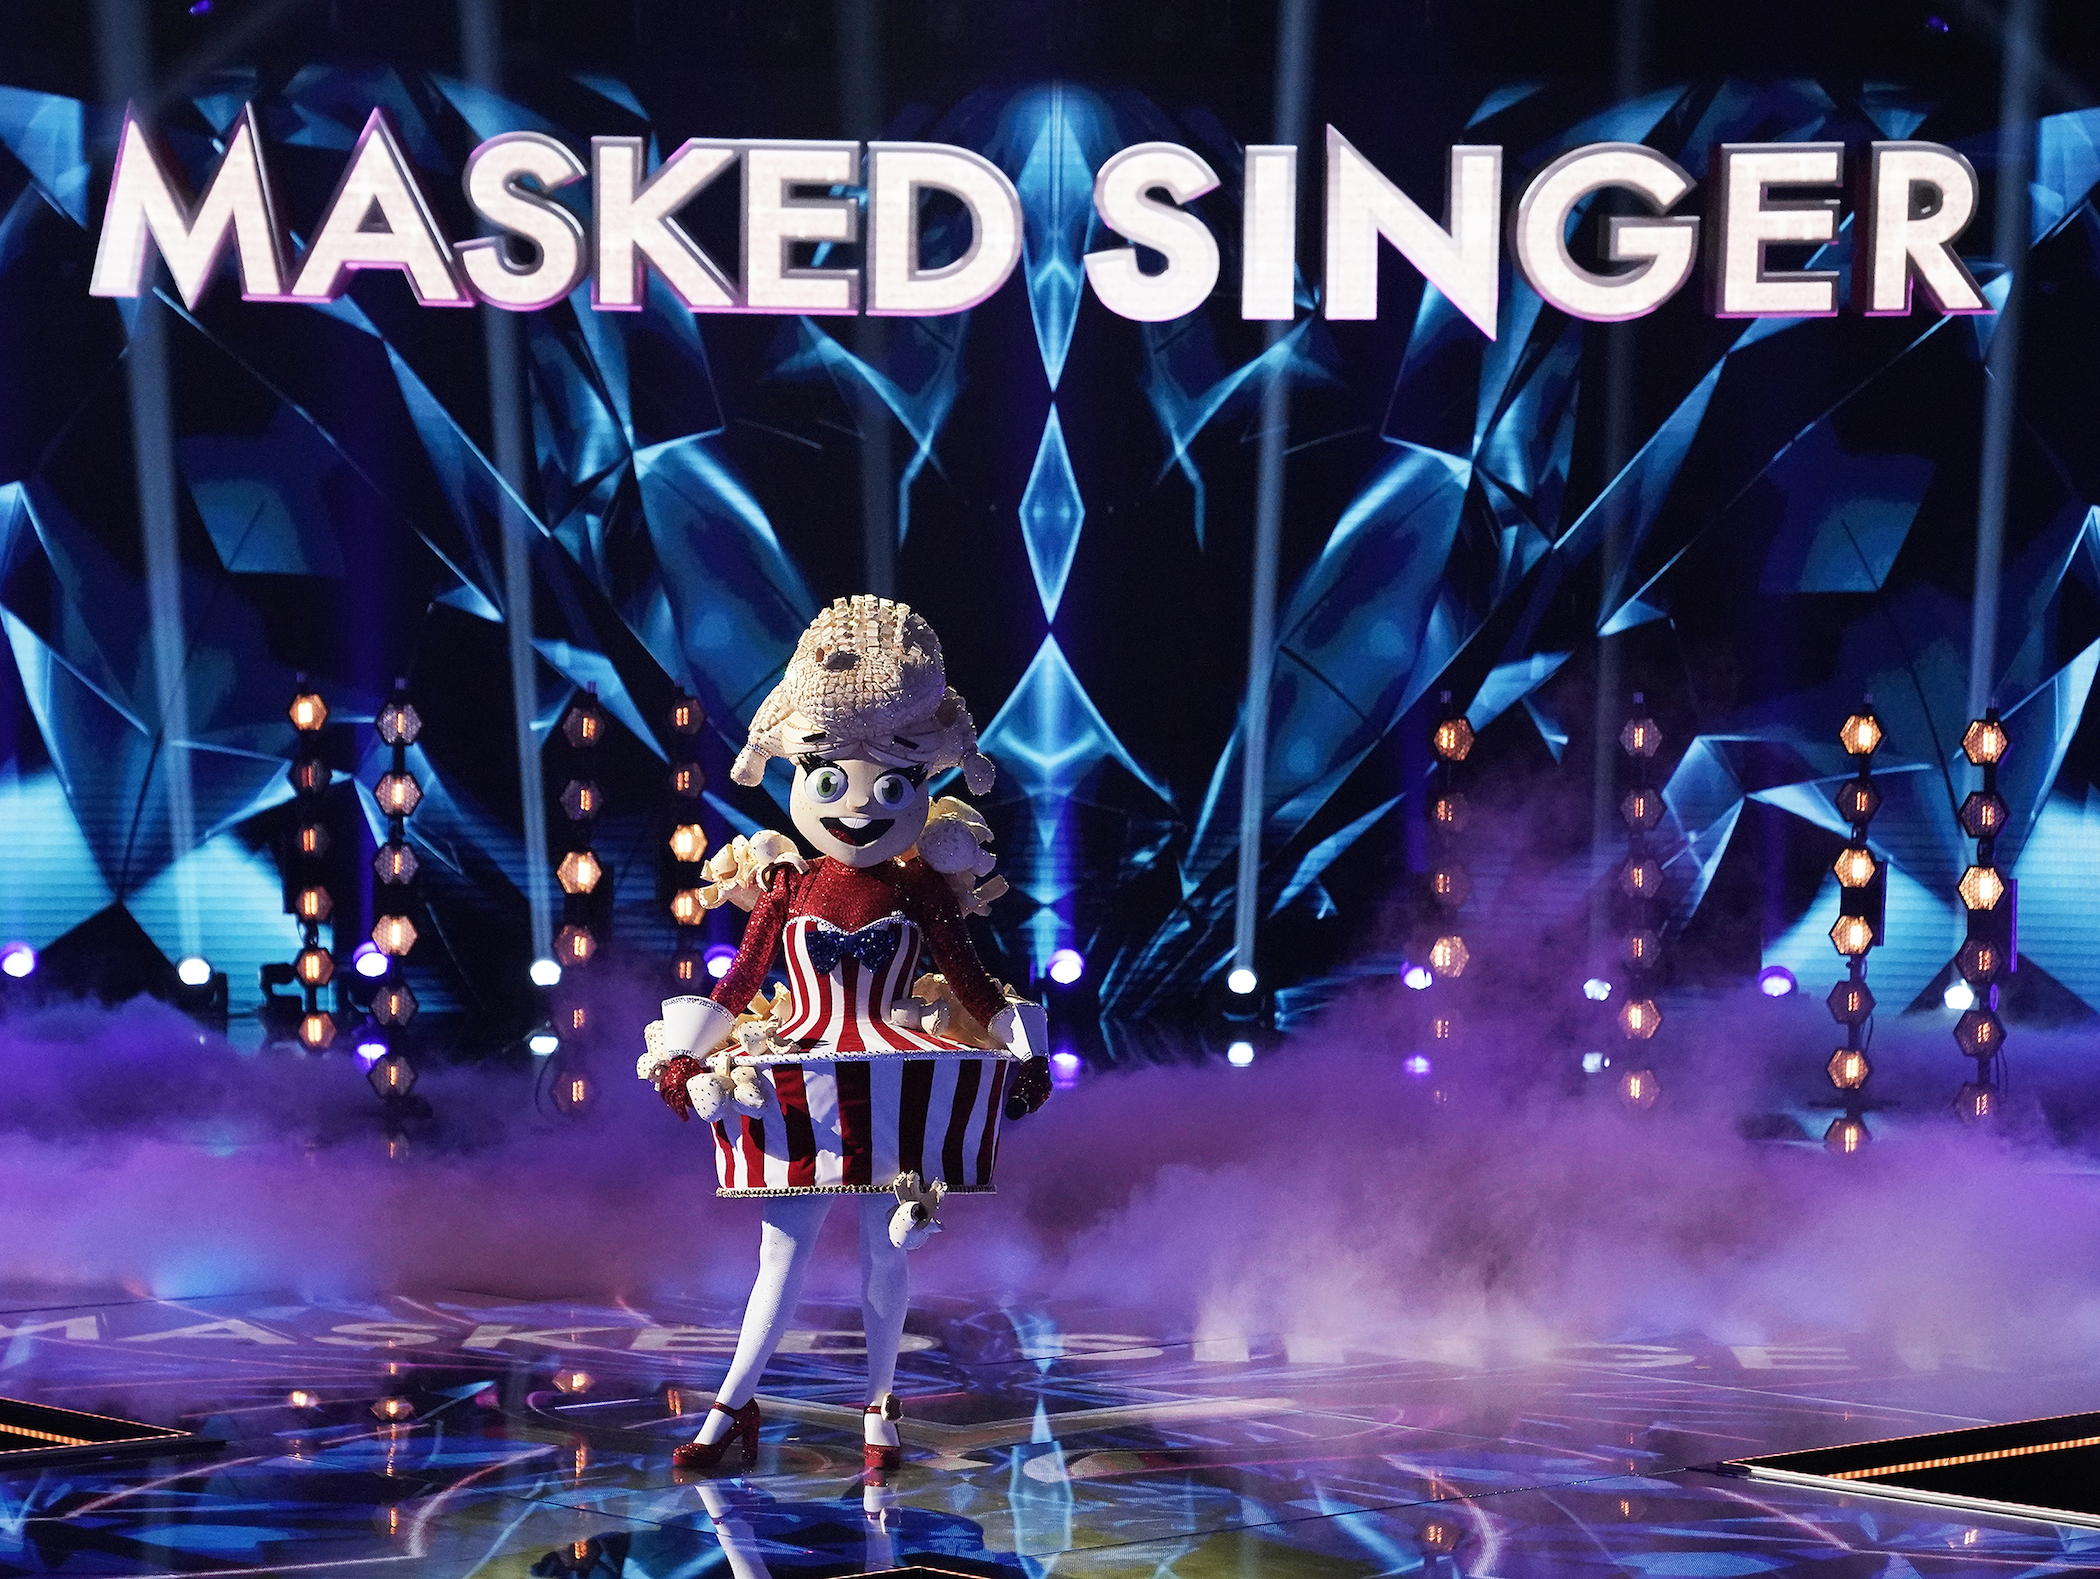 The stage of Fox's 'The Masked Singer' with one of the masked singer contestants in costume ready to perform